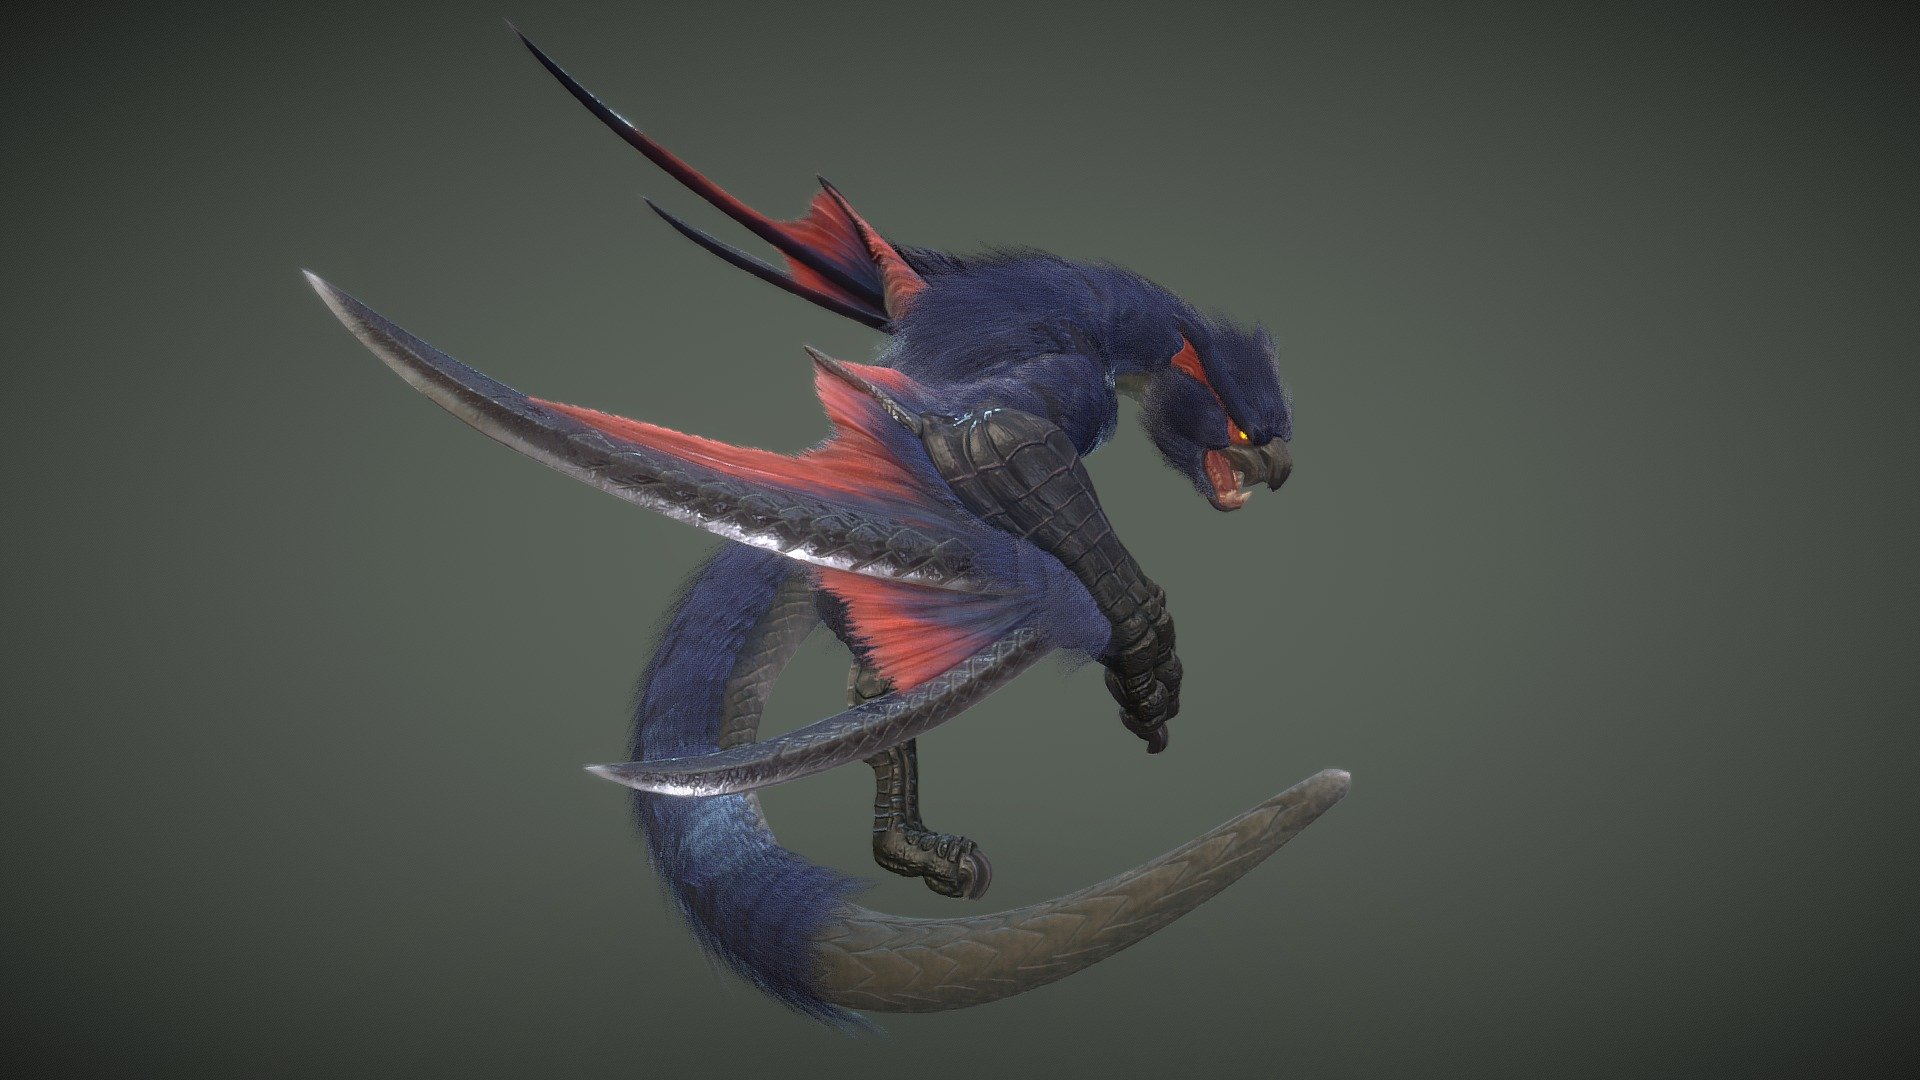 Monster Hunter Fan art. Something i have been working on to practice with hair and fur 3d model